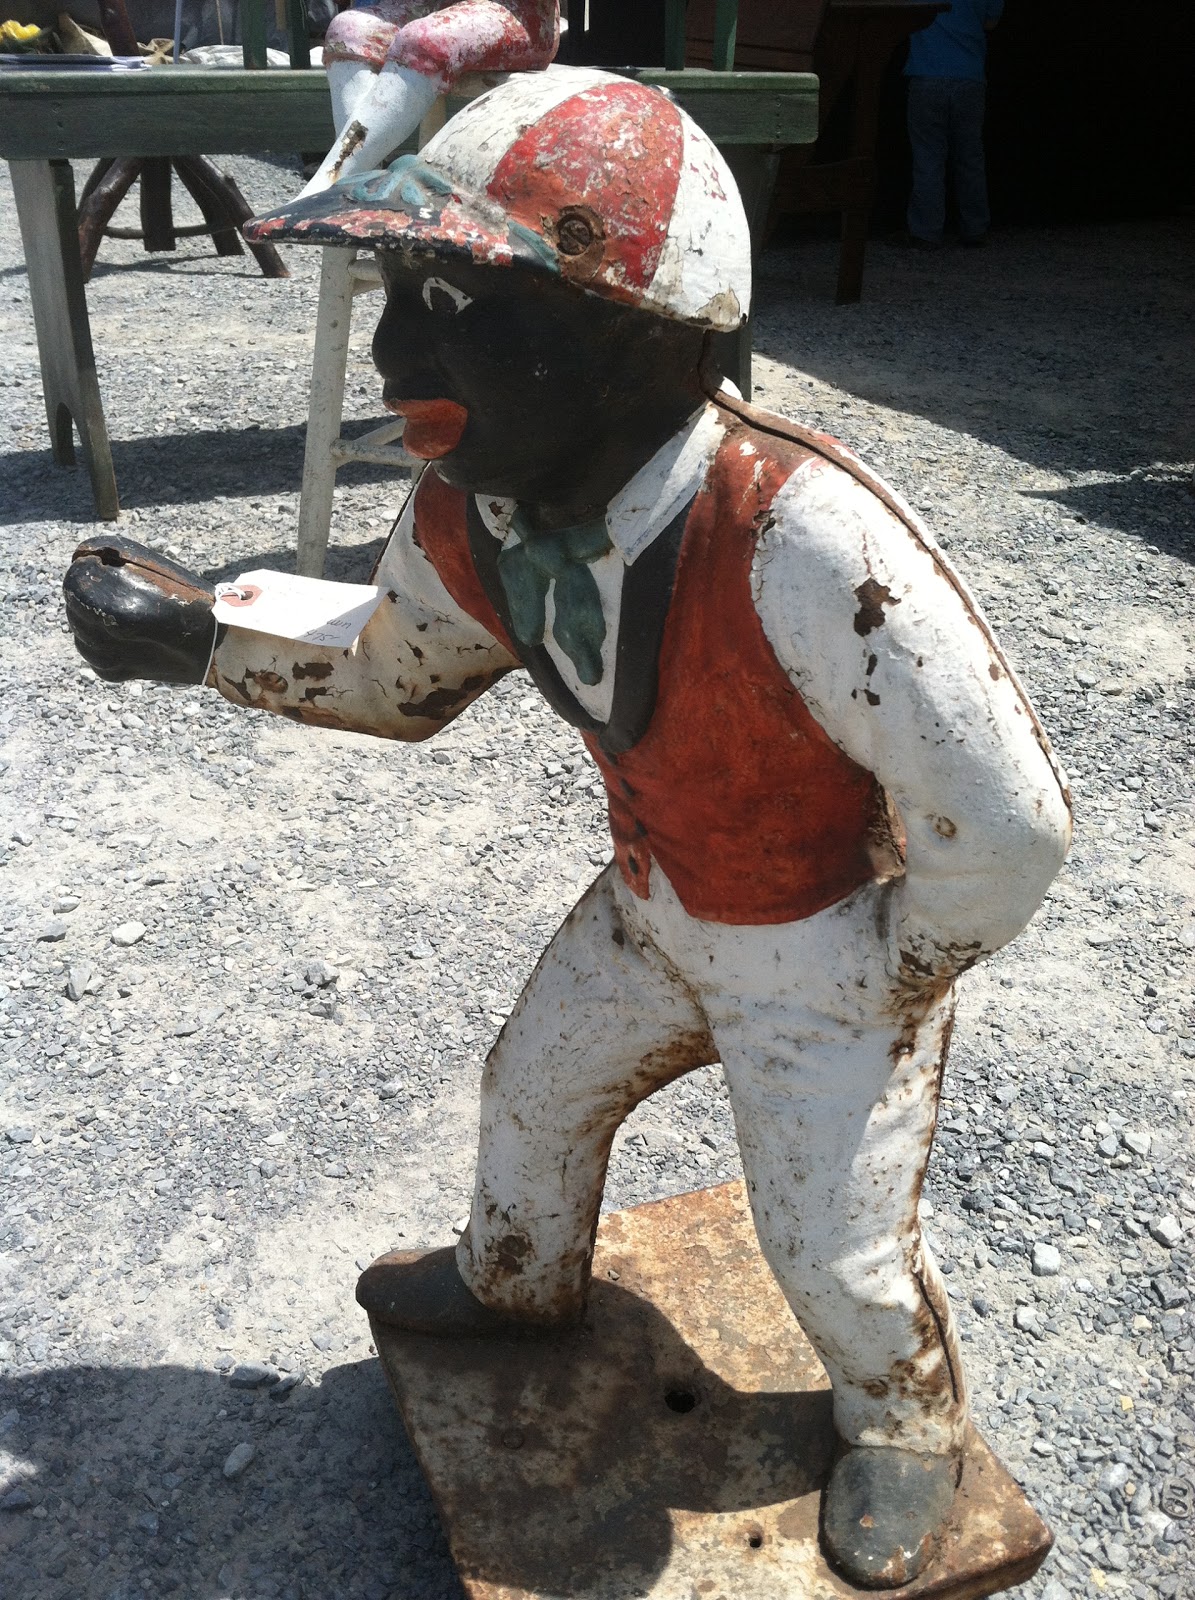 Horse Country Chic: Another Lawn Jockey